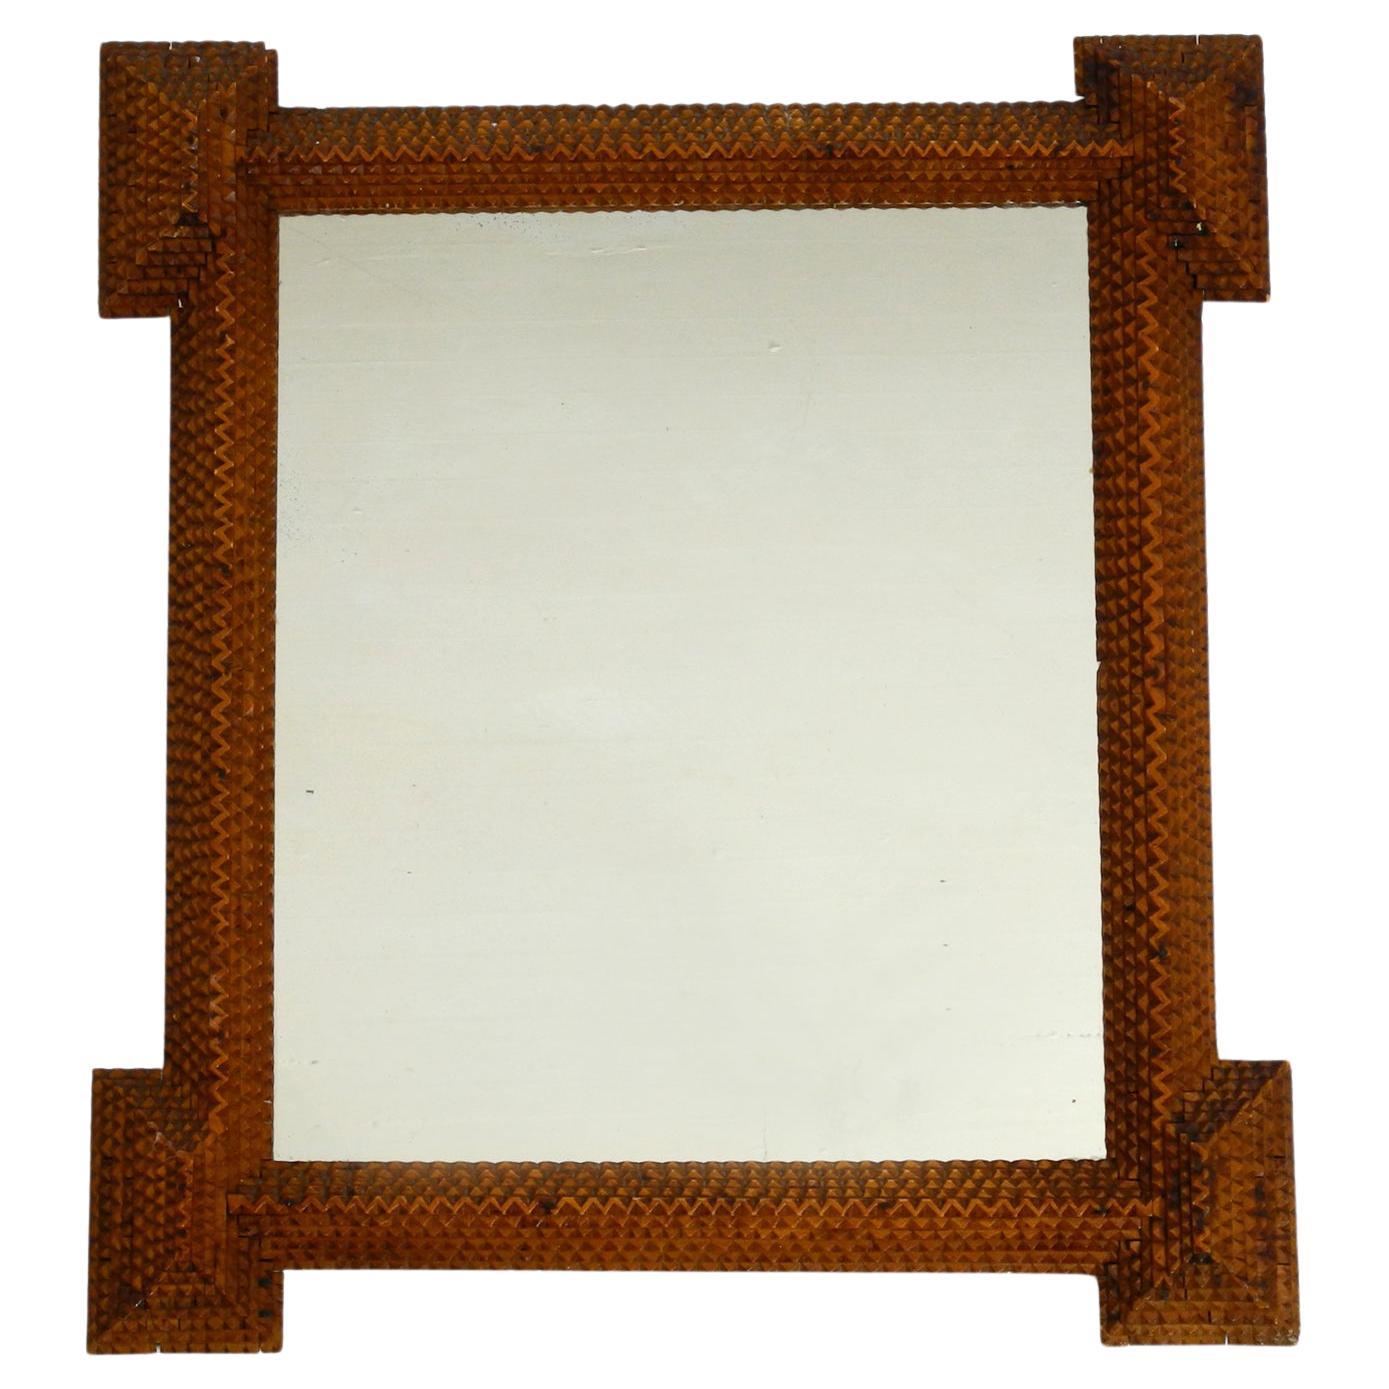 Beautiful 1930s Wall Mirror with a High Quality Wooden Frame